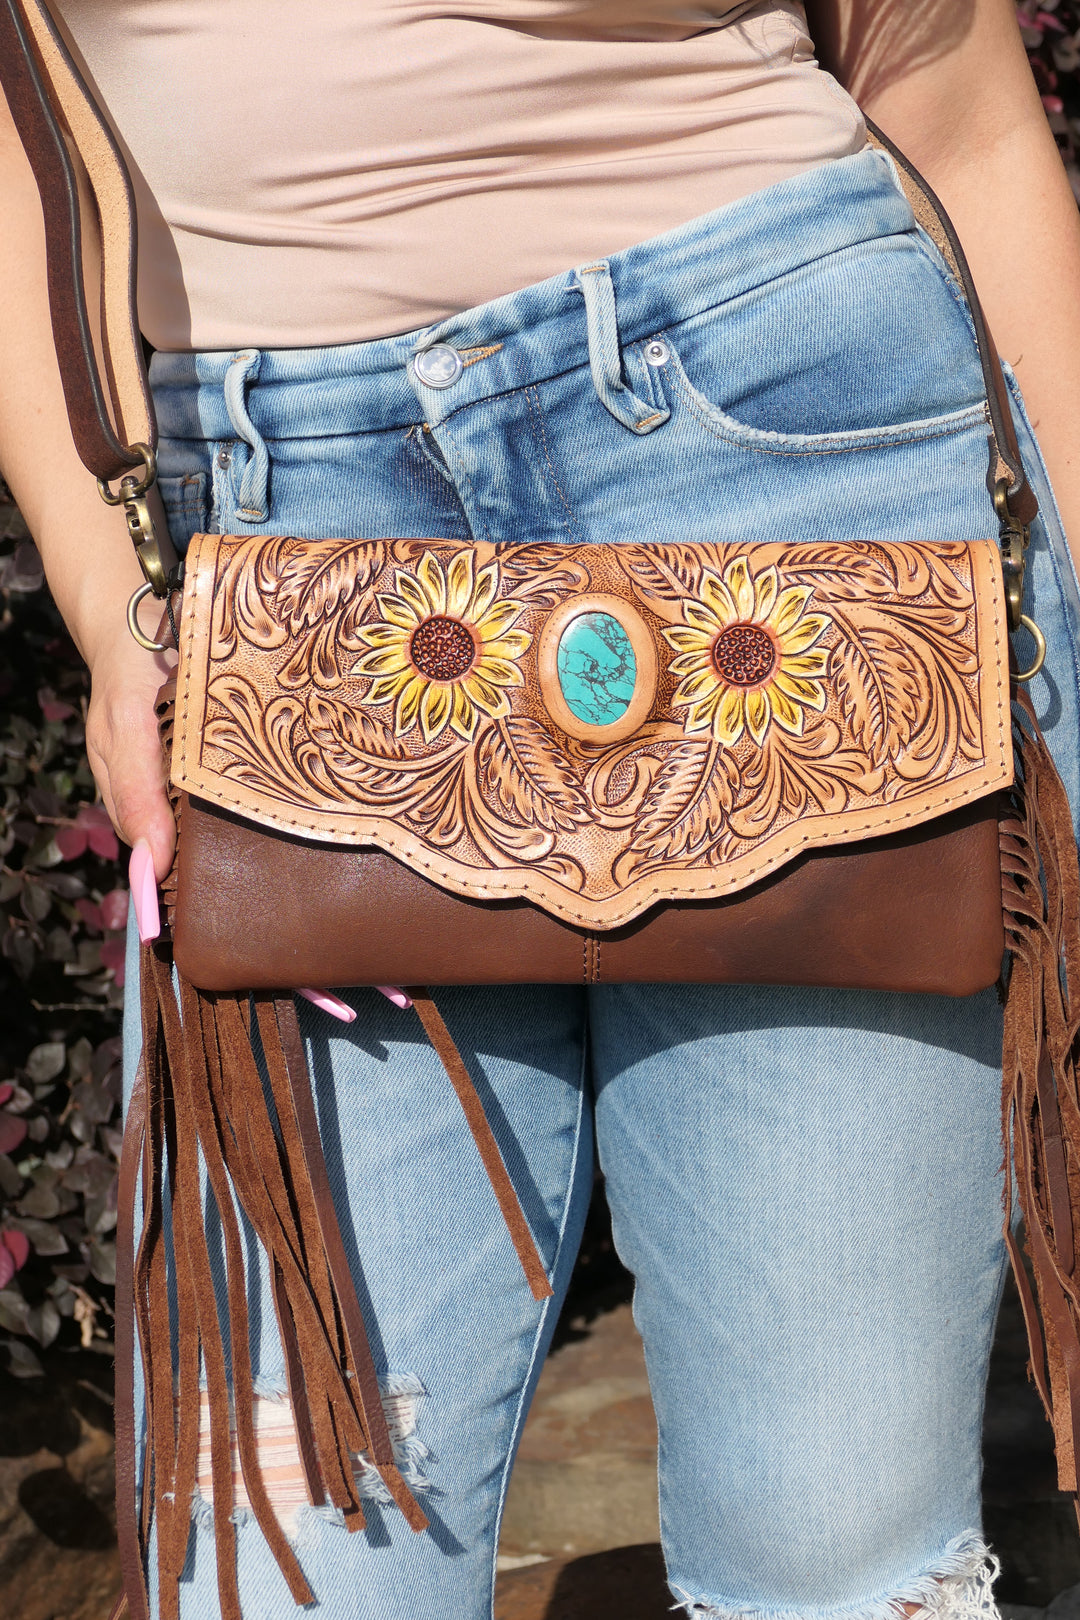 American Darling - Leather Tooled Sunflowers Crossbody or Clutch with Fringes